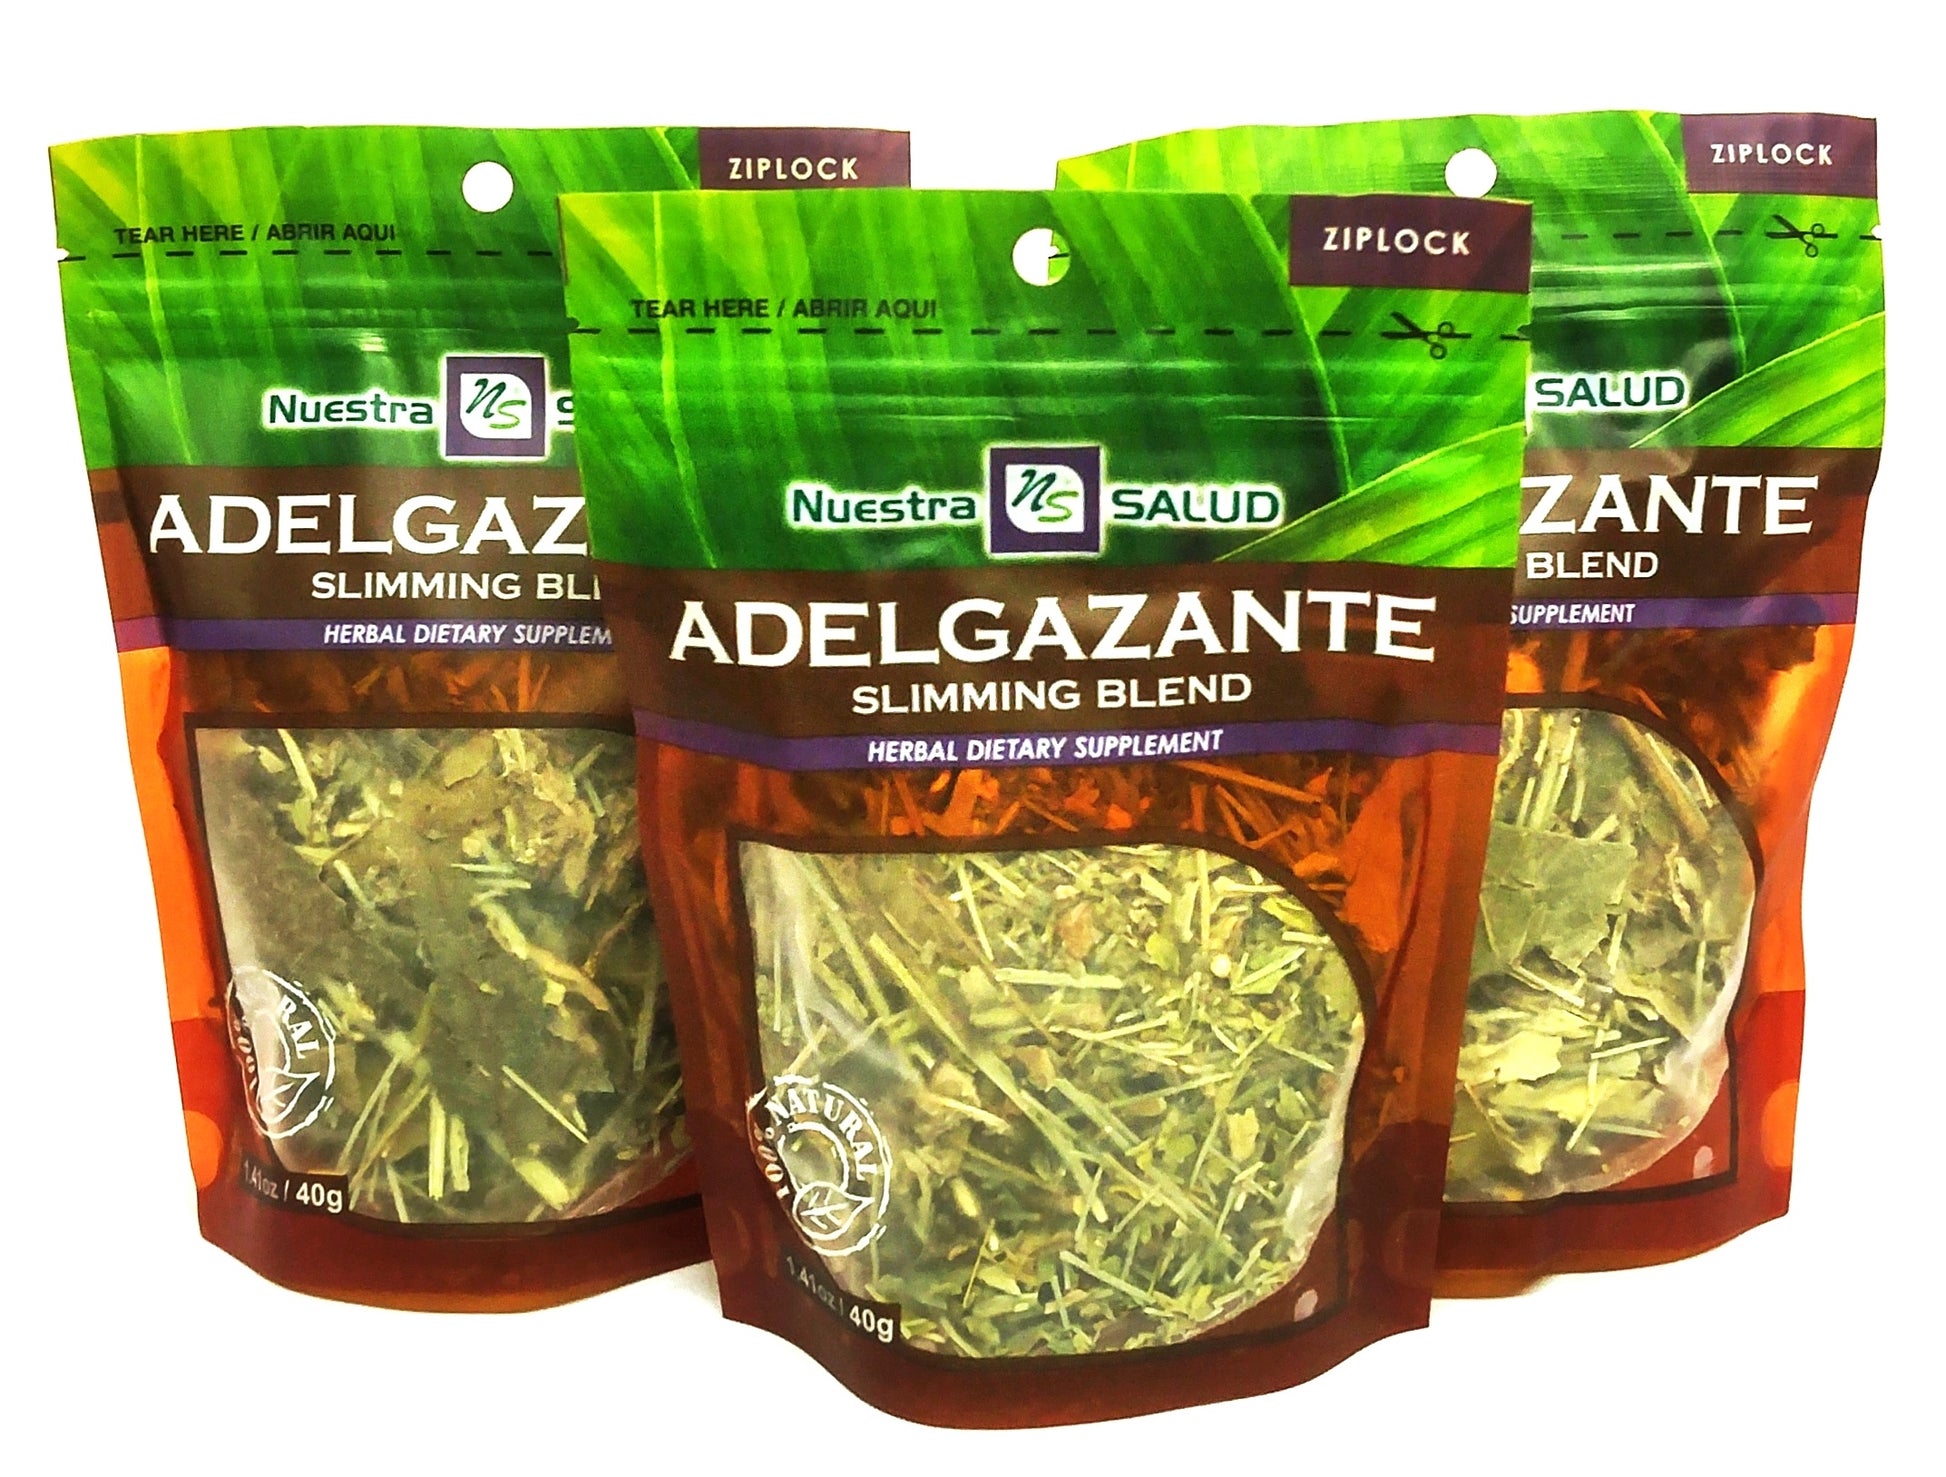  Adelgazante Slimming Blend Loose Herbal Infusion Tea Value Pack (120g) by Nuestra Salud sold by NS Herbs Co.